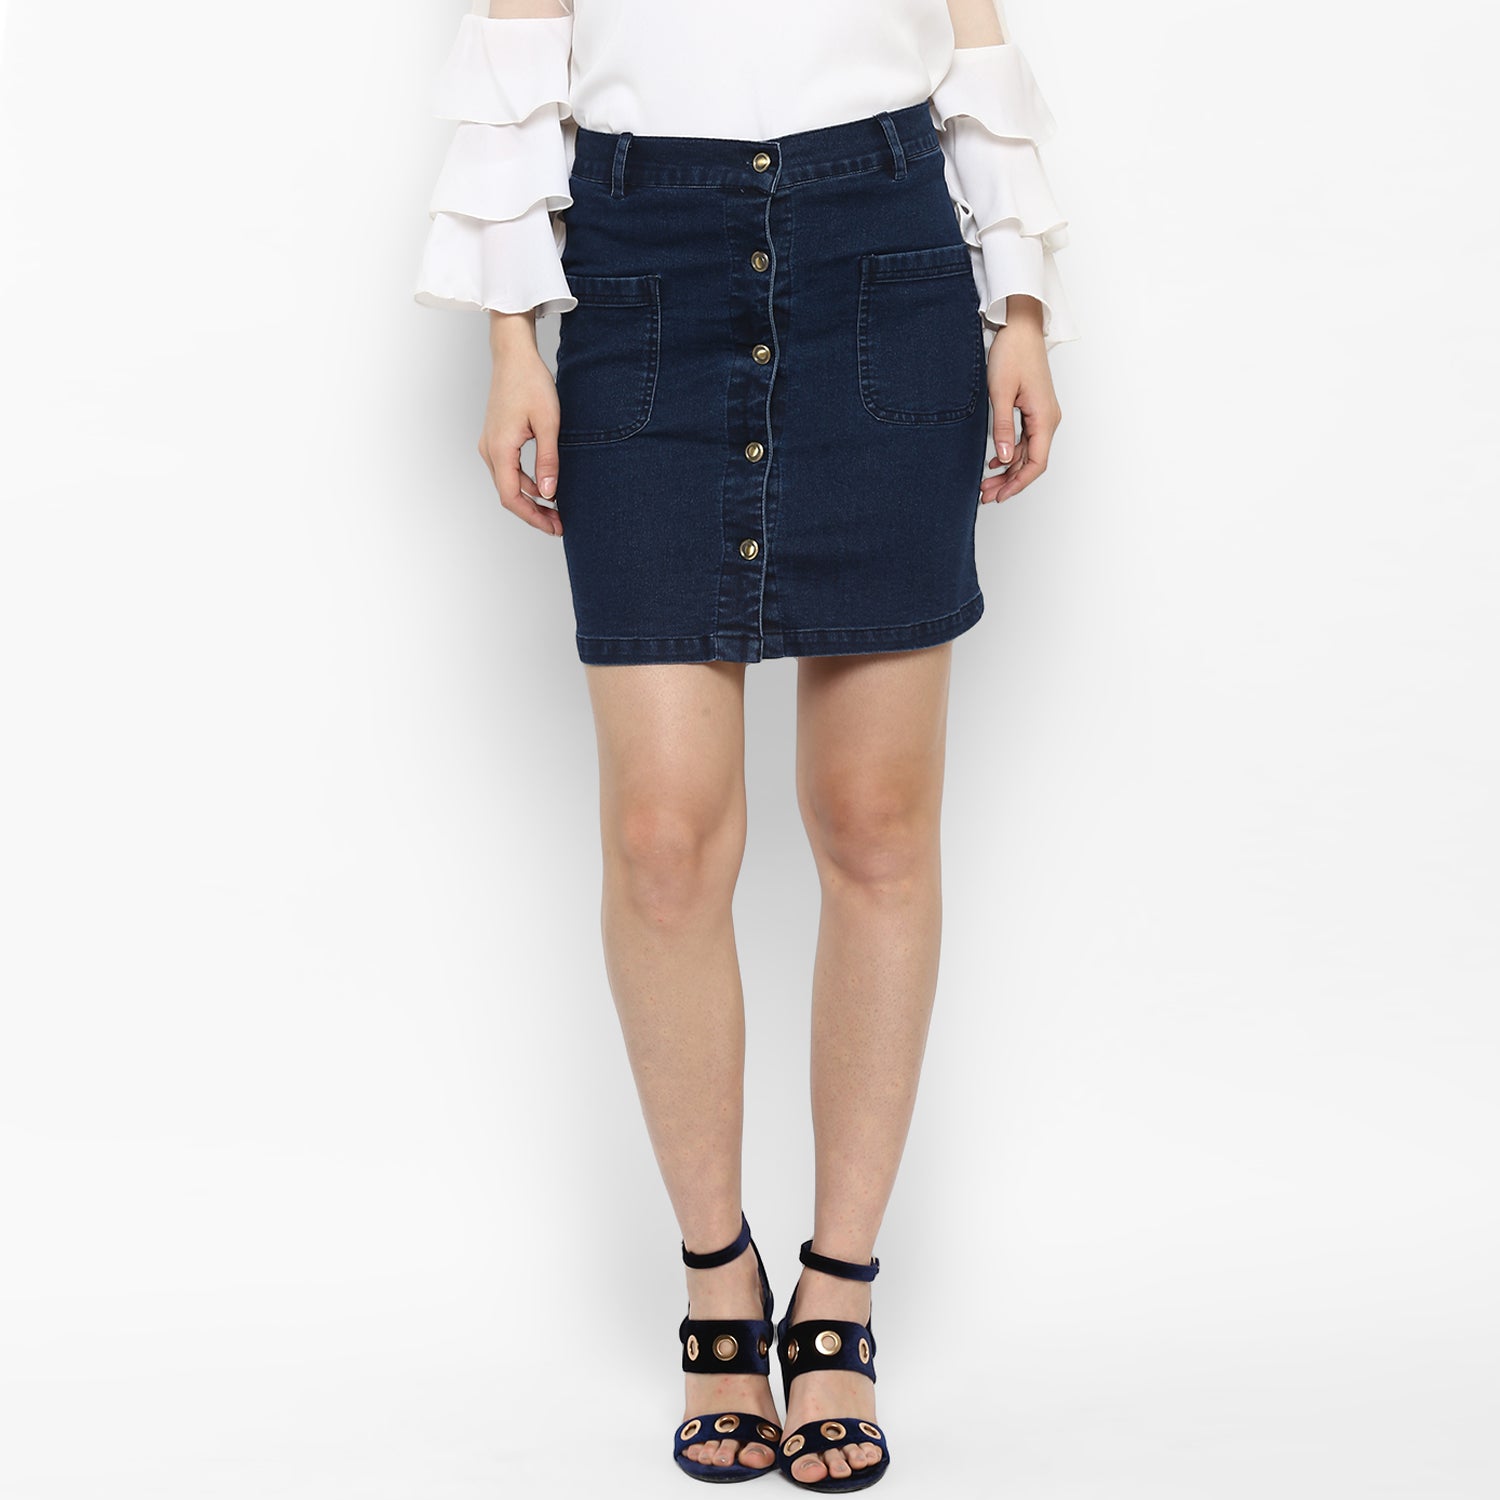 Women's Denim Skirt with Front Buttons - StyleStone